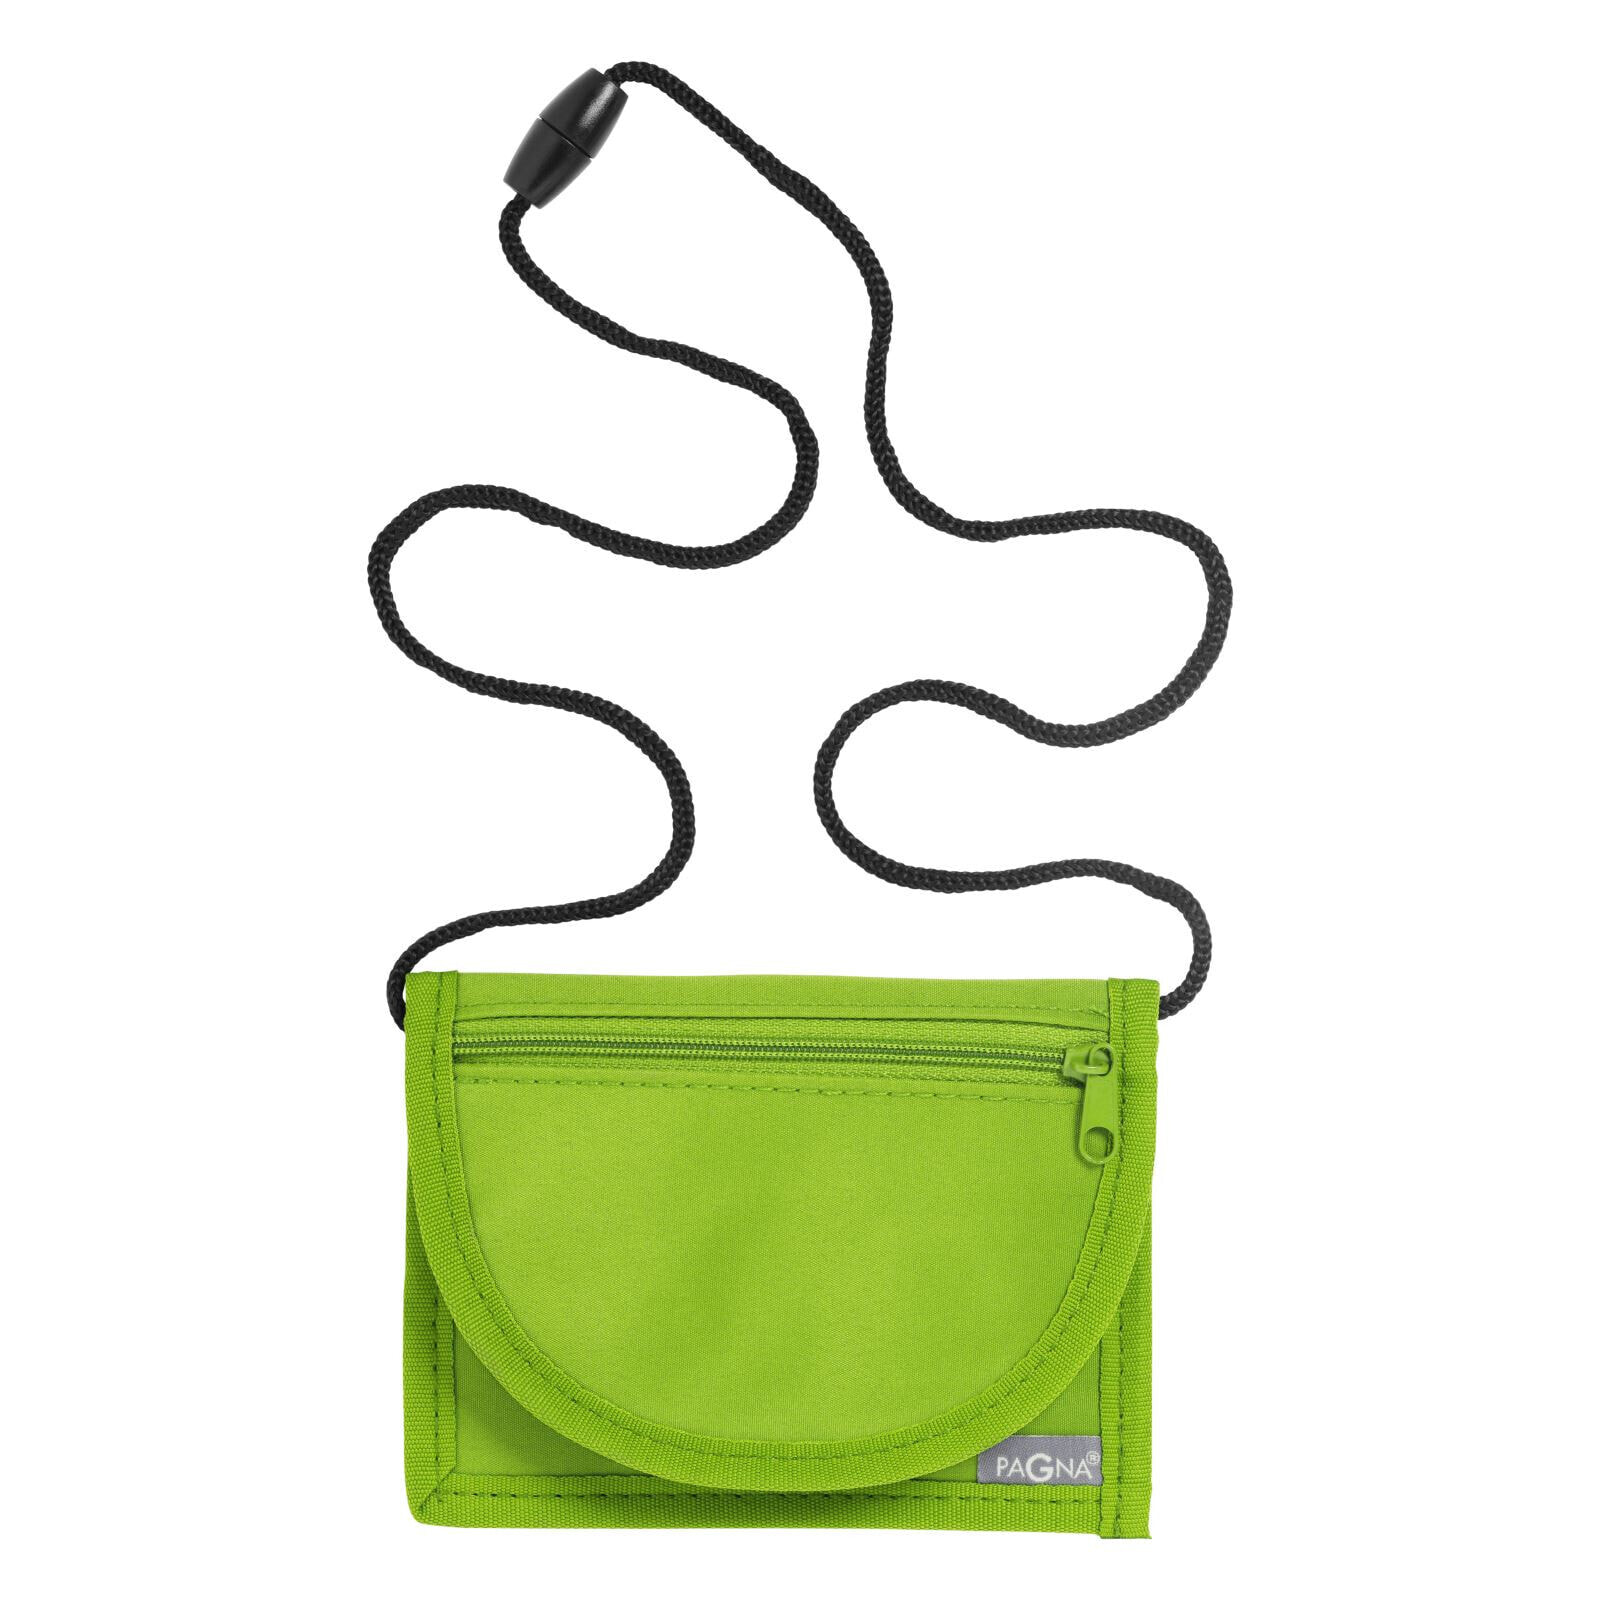 Pagna 99507-17 - Neck pouch - Green - Nylon - Monochromatic - Neck strap - Hook-and-loop closure